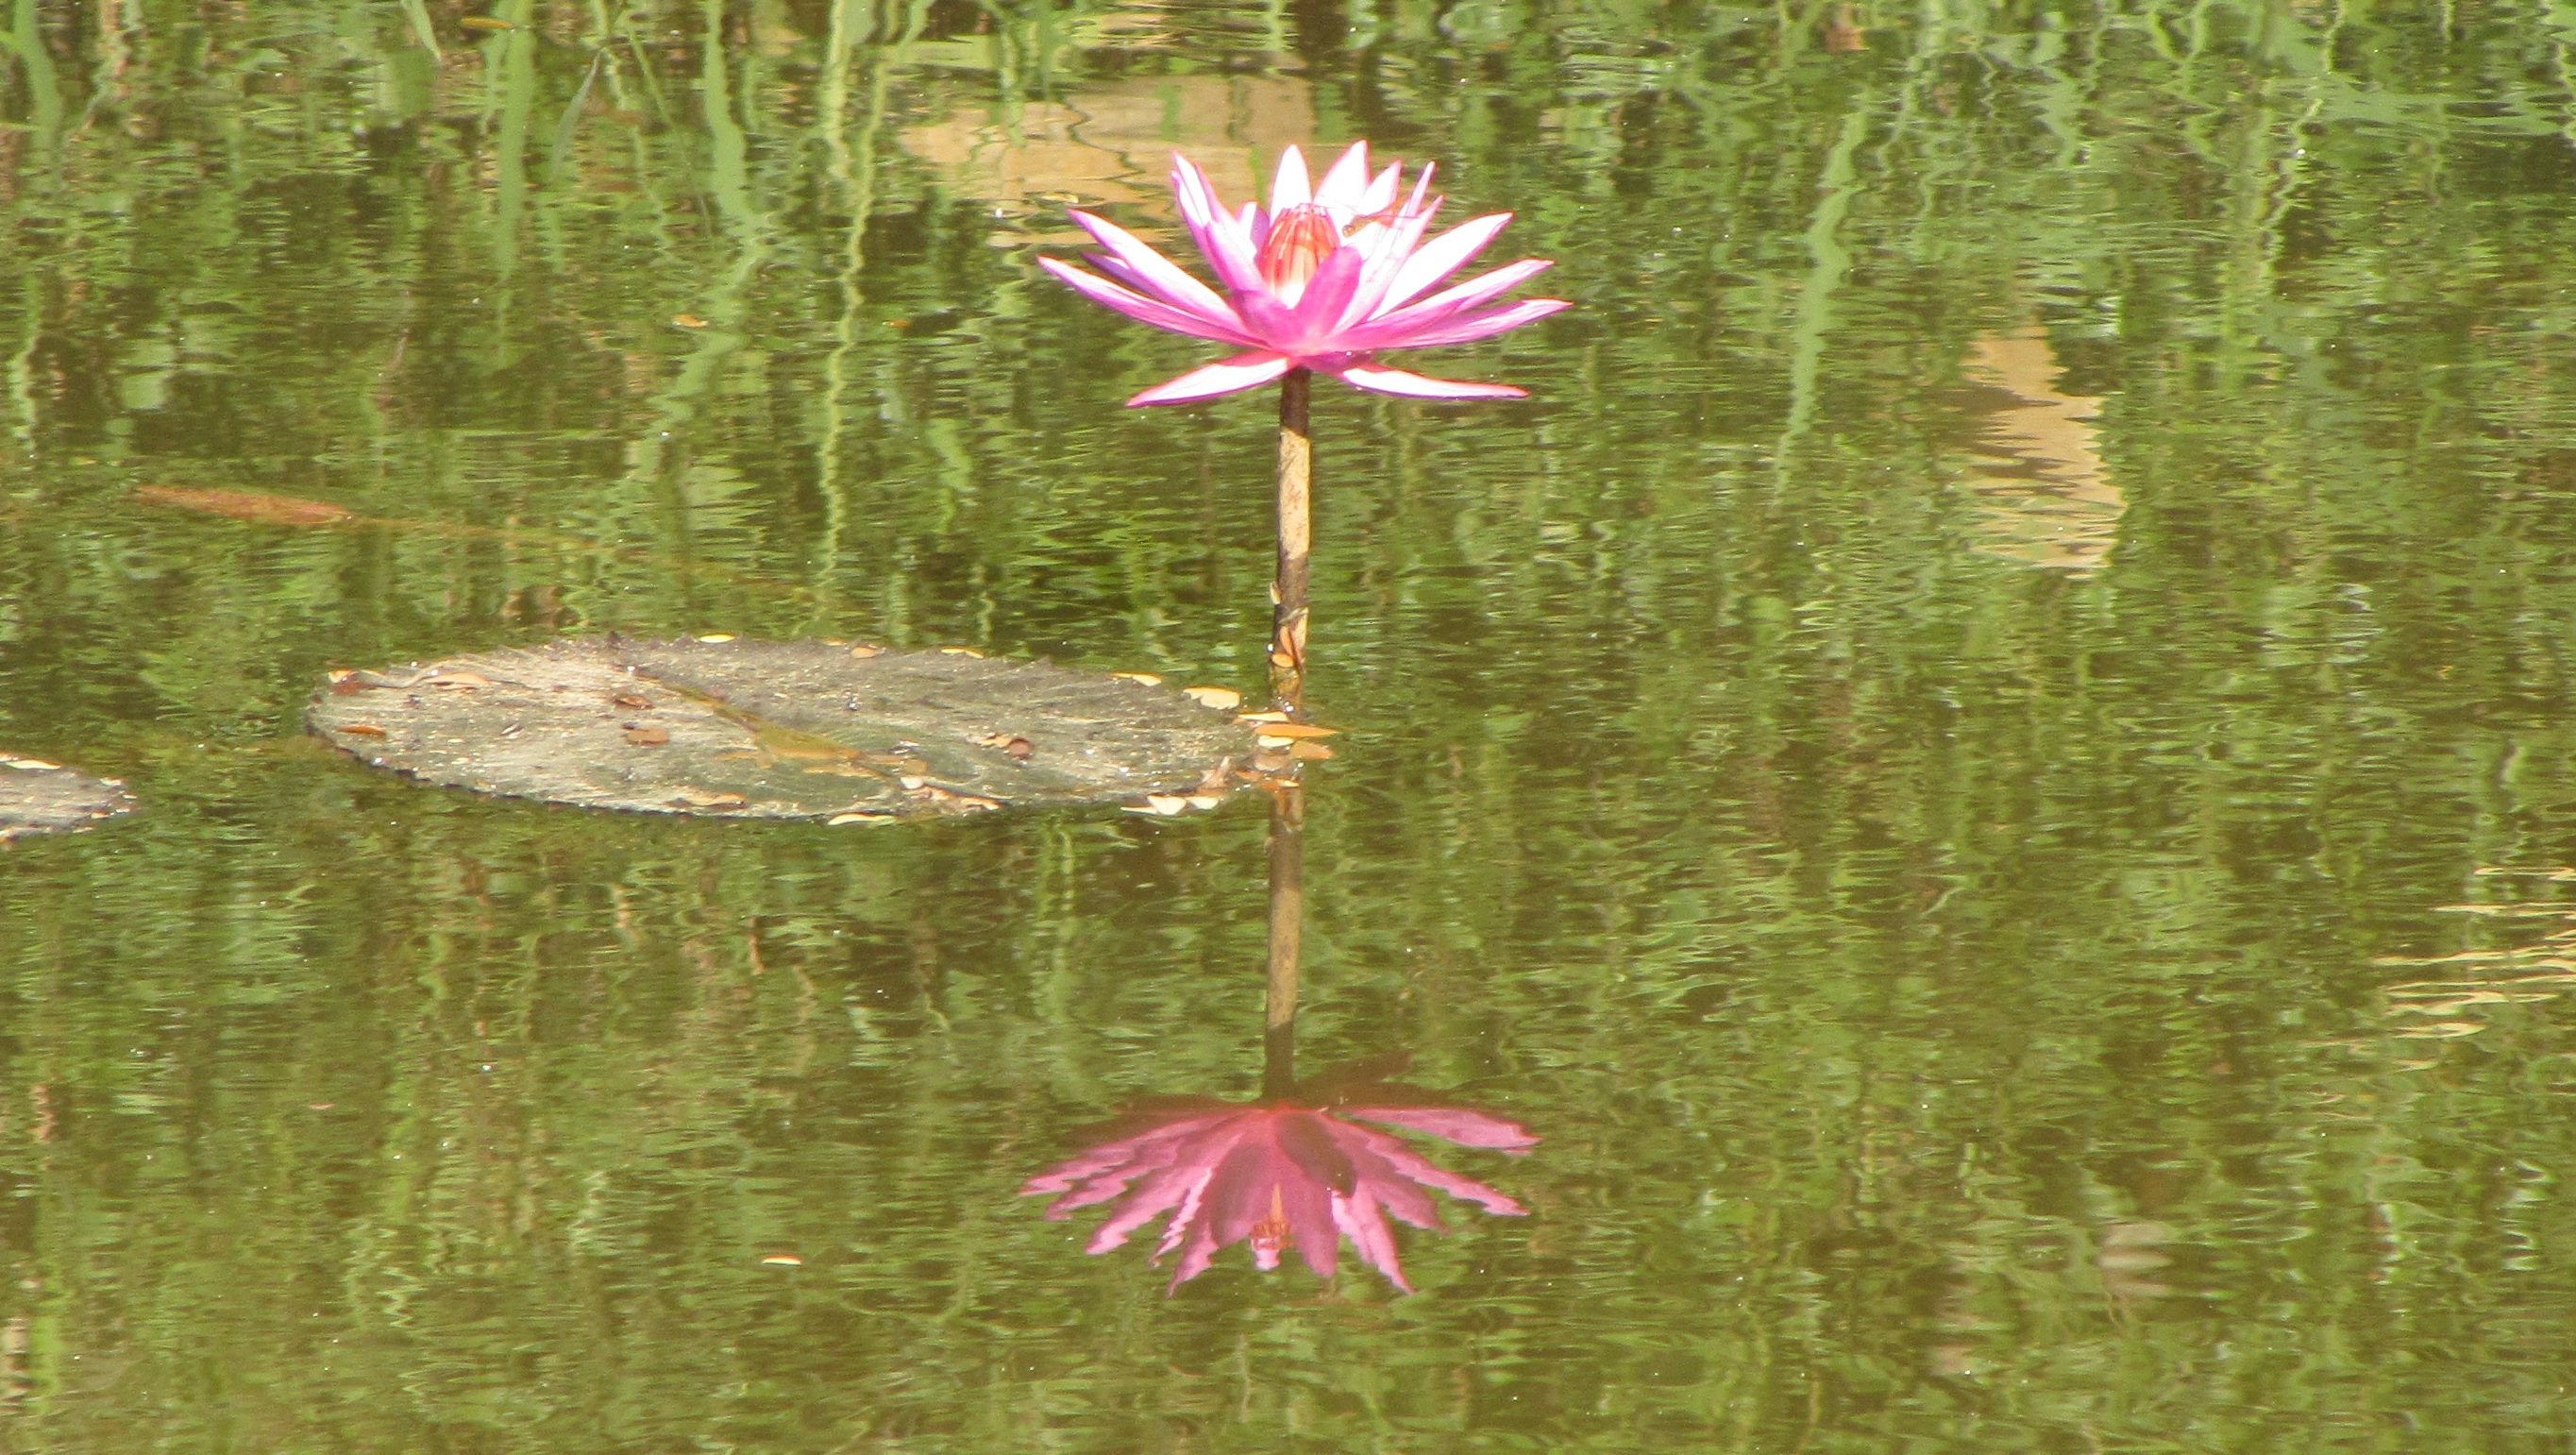 cam-siem-reap-river-lilly